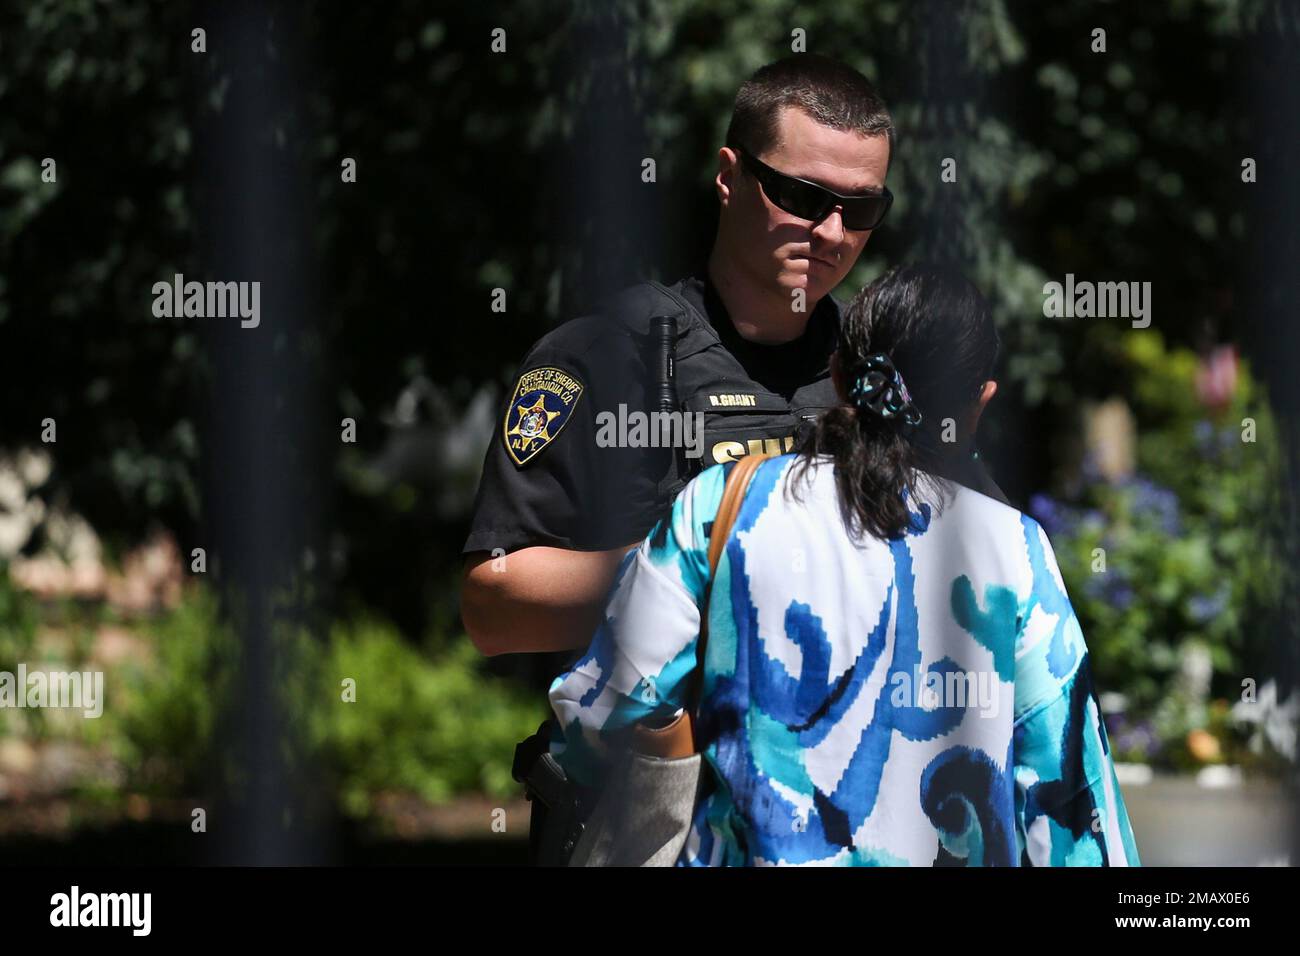 An officer with the Chautauqua Sheriffs Department speaks to a person at the Chautauqua Institution in Chautauqua, N.Y., Friday,